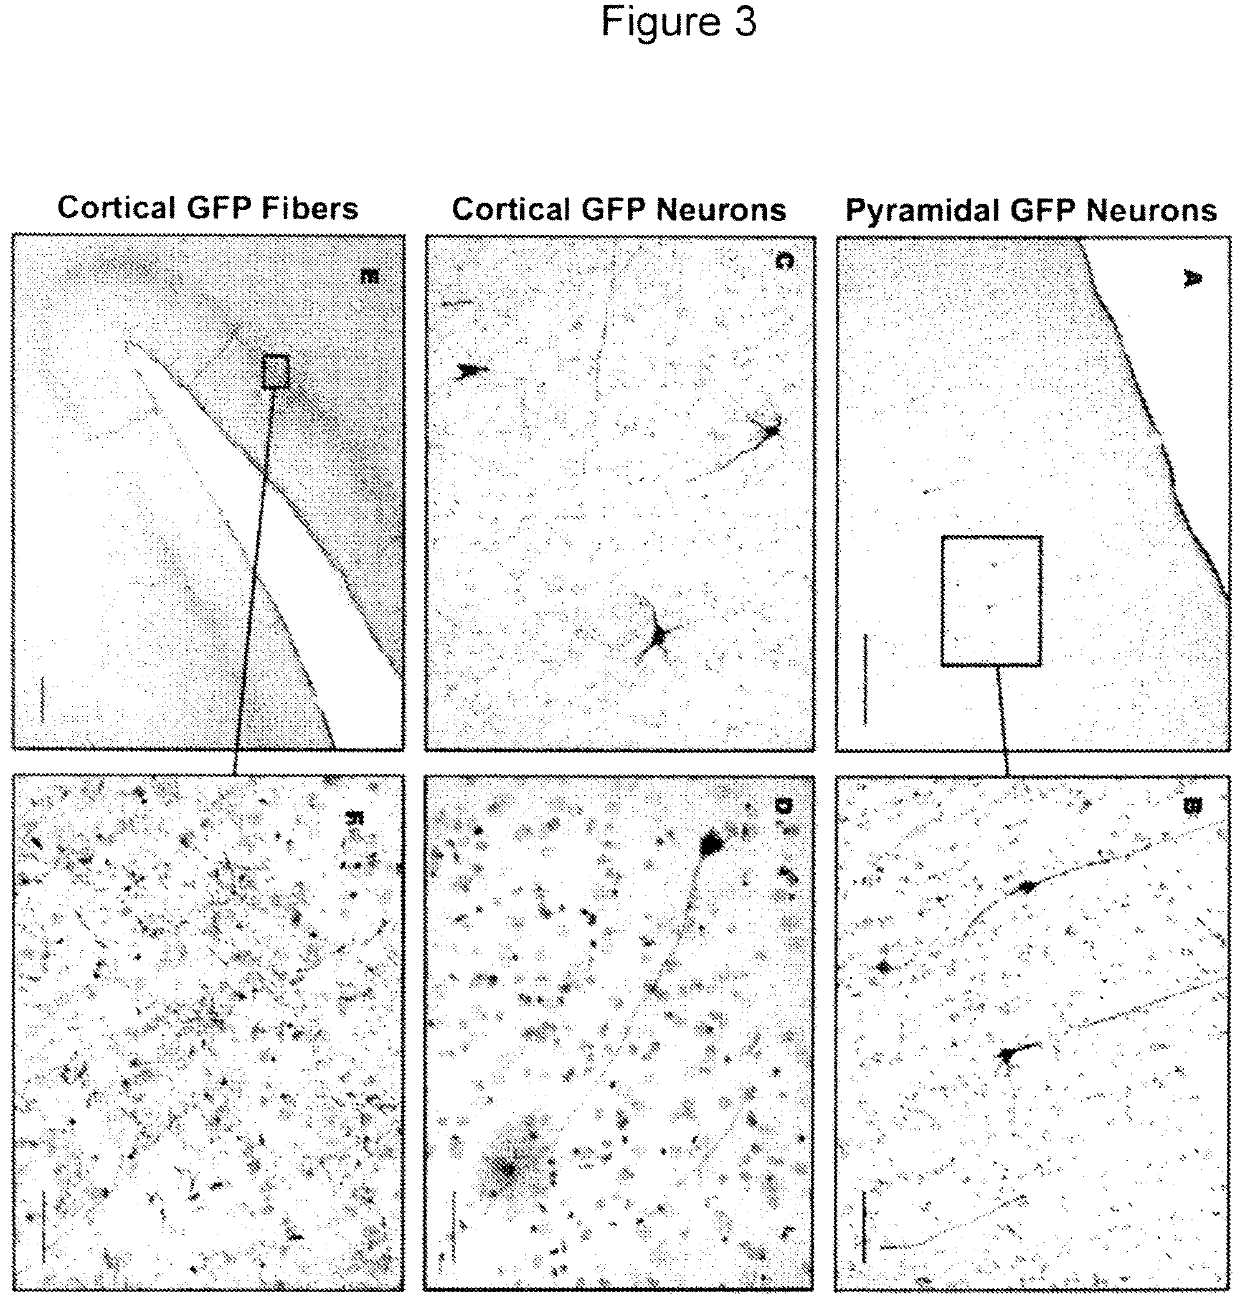 Methods for distributing high levels of therapeutic agent throughout the cortex to treat neurological disorders